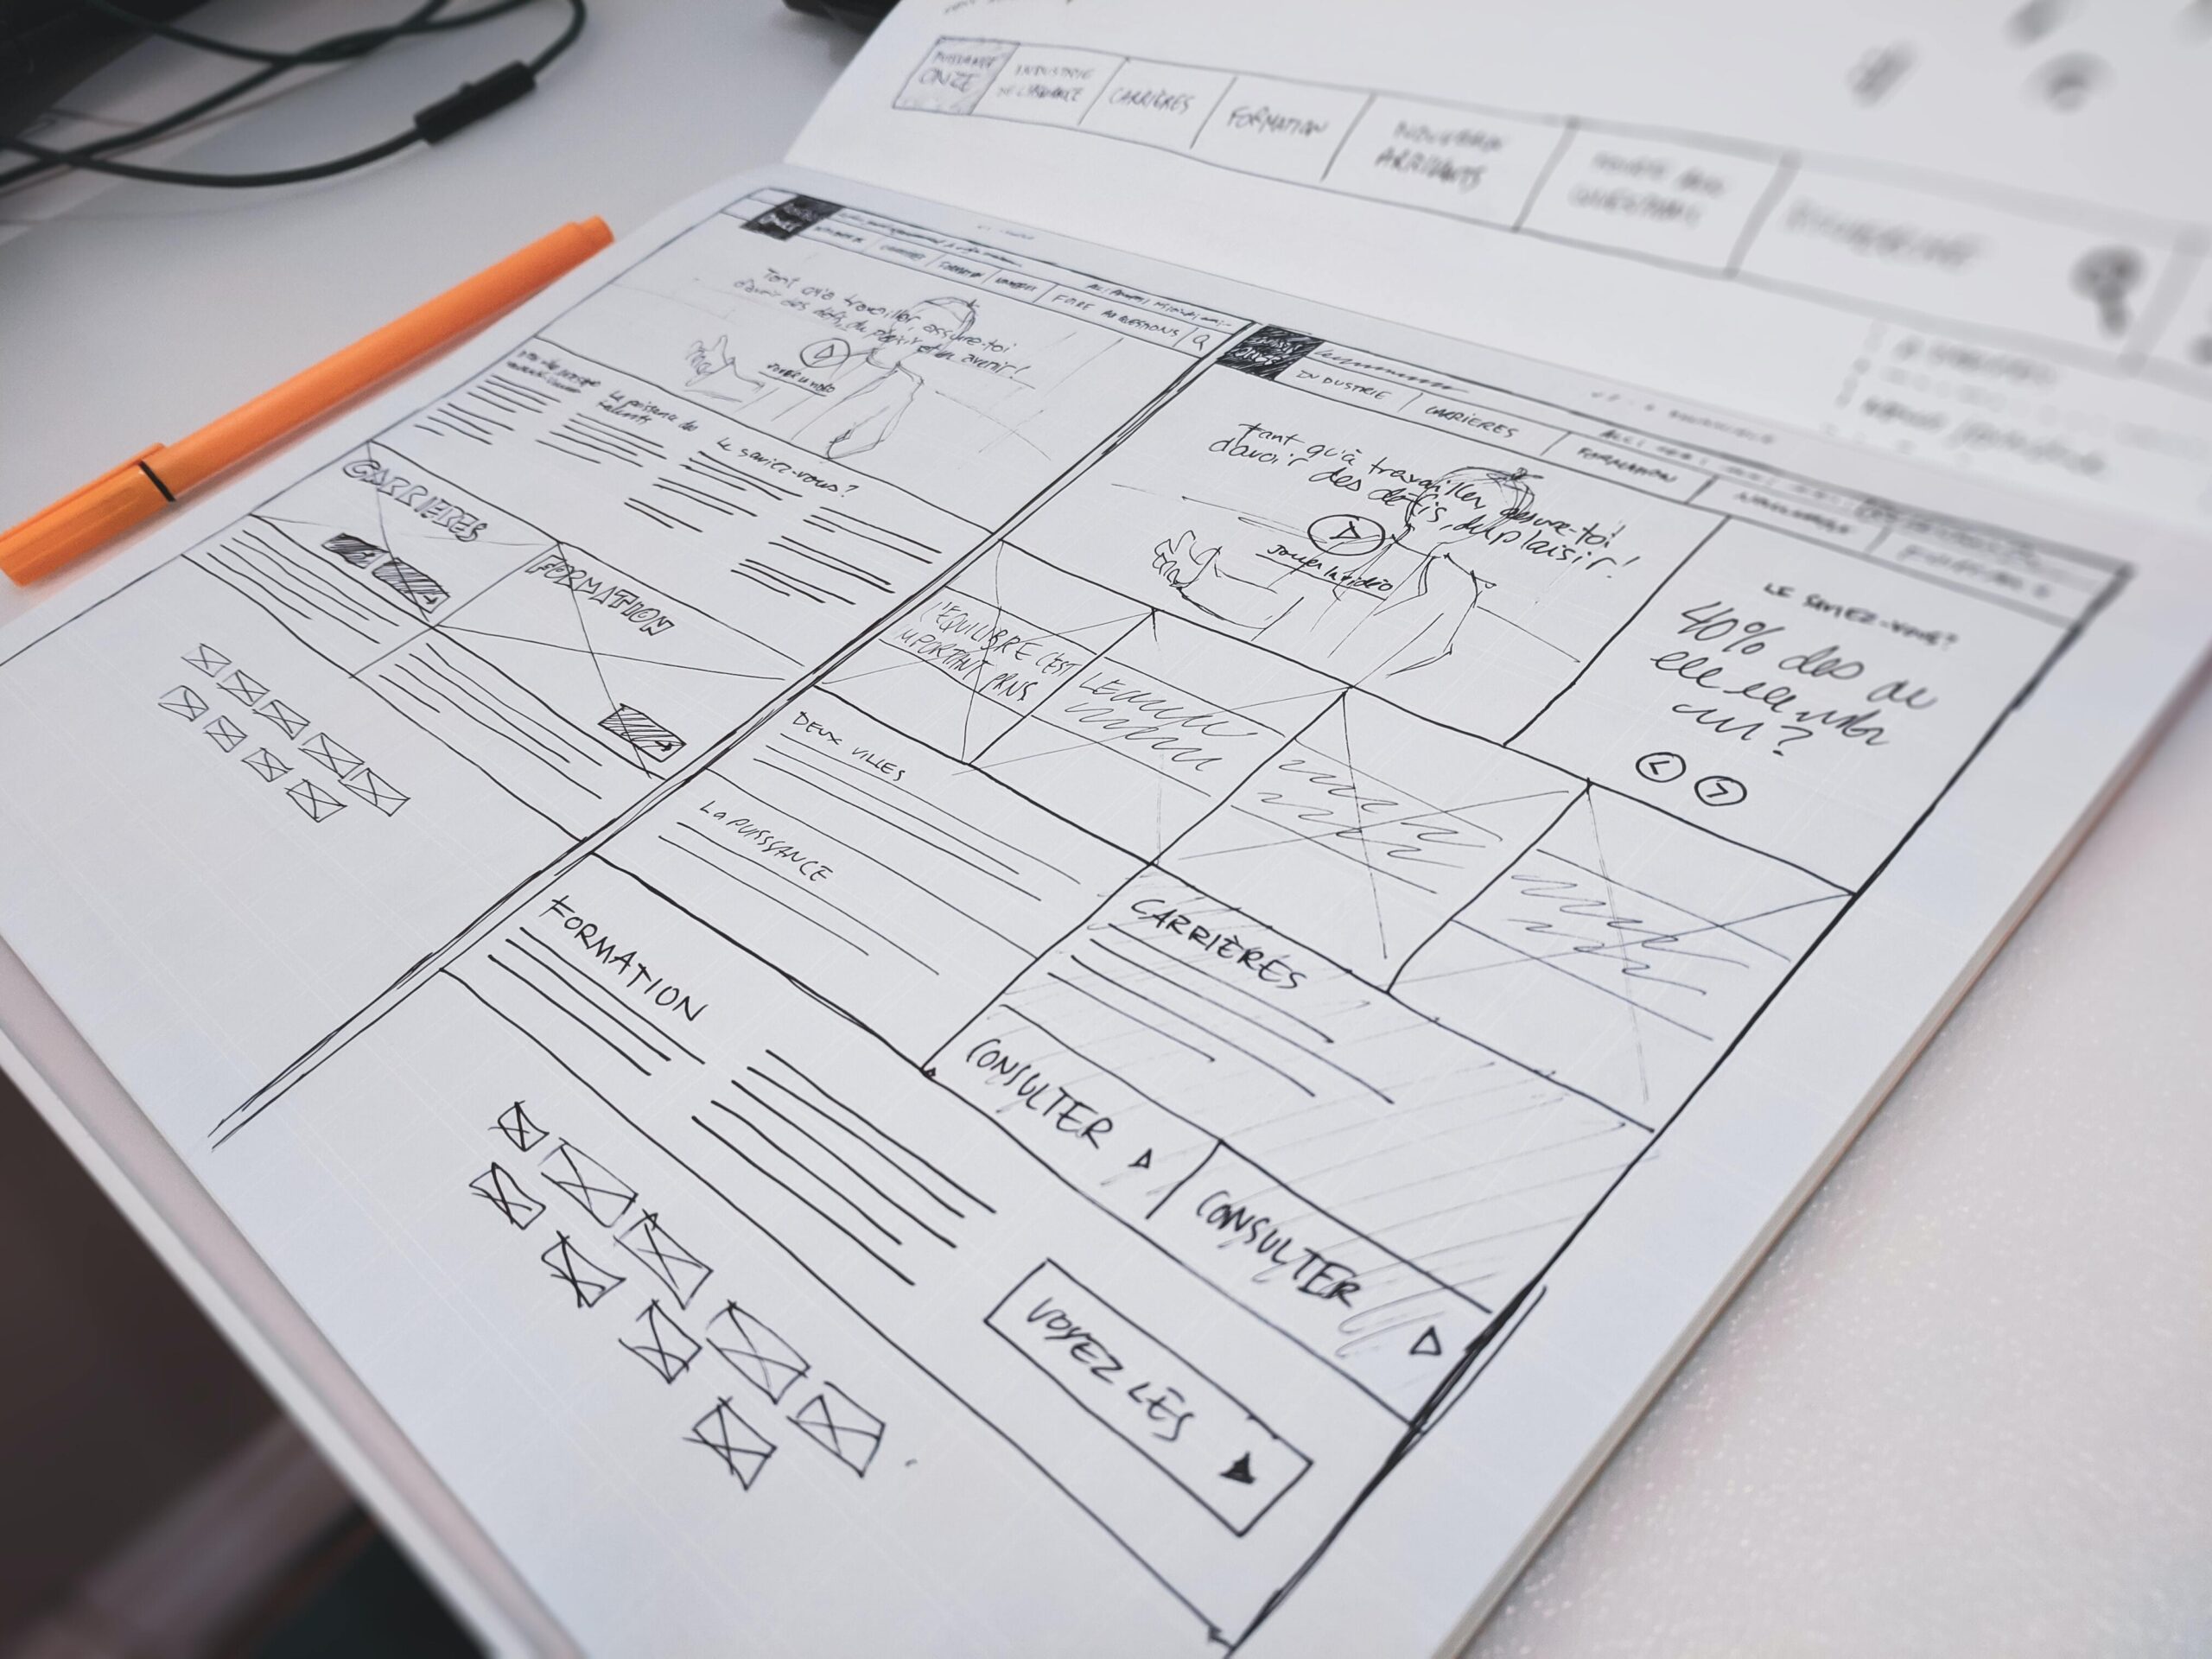 An open notebook with hand-drawn wireframes.